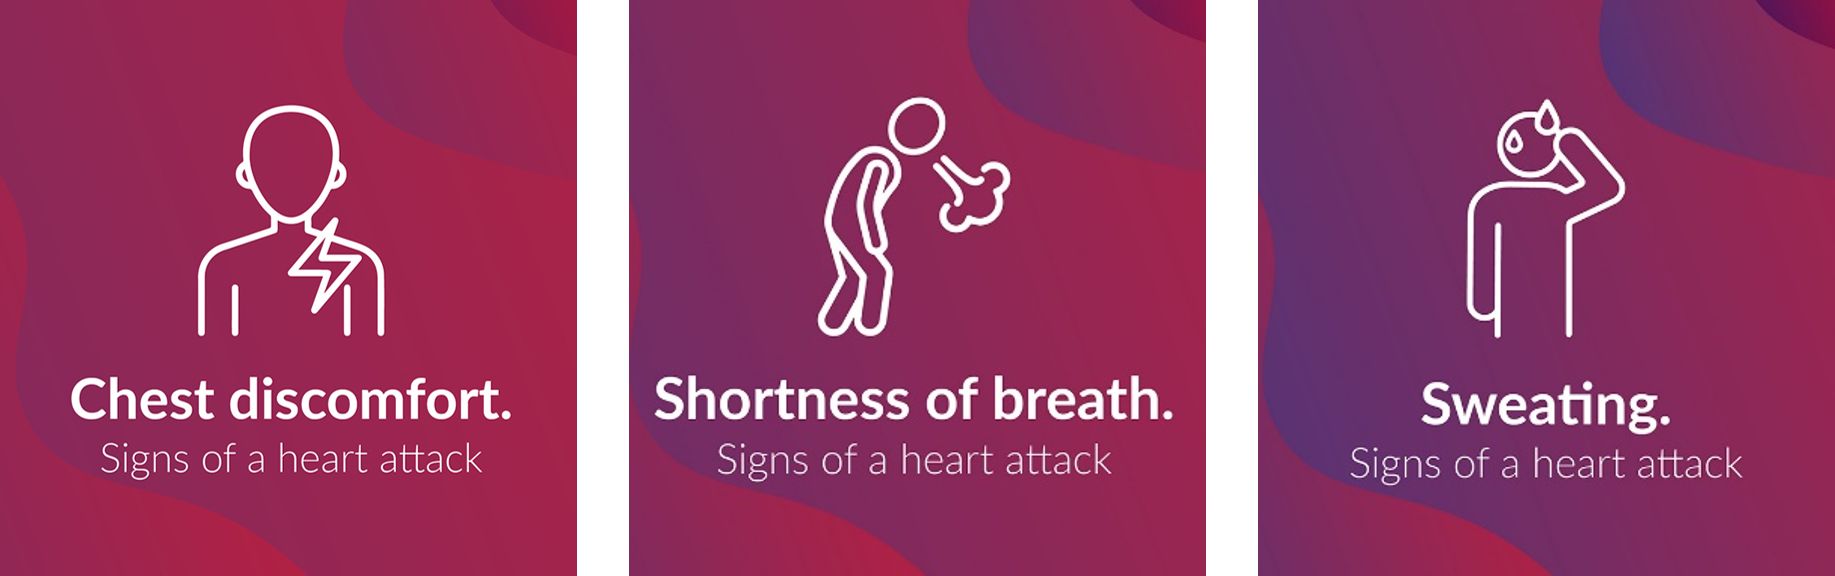 Signs of a heart attack: Chest discomfort; Shortness of breath; and Sweating.